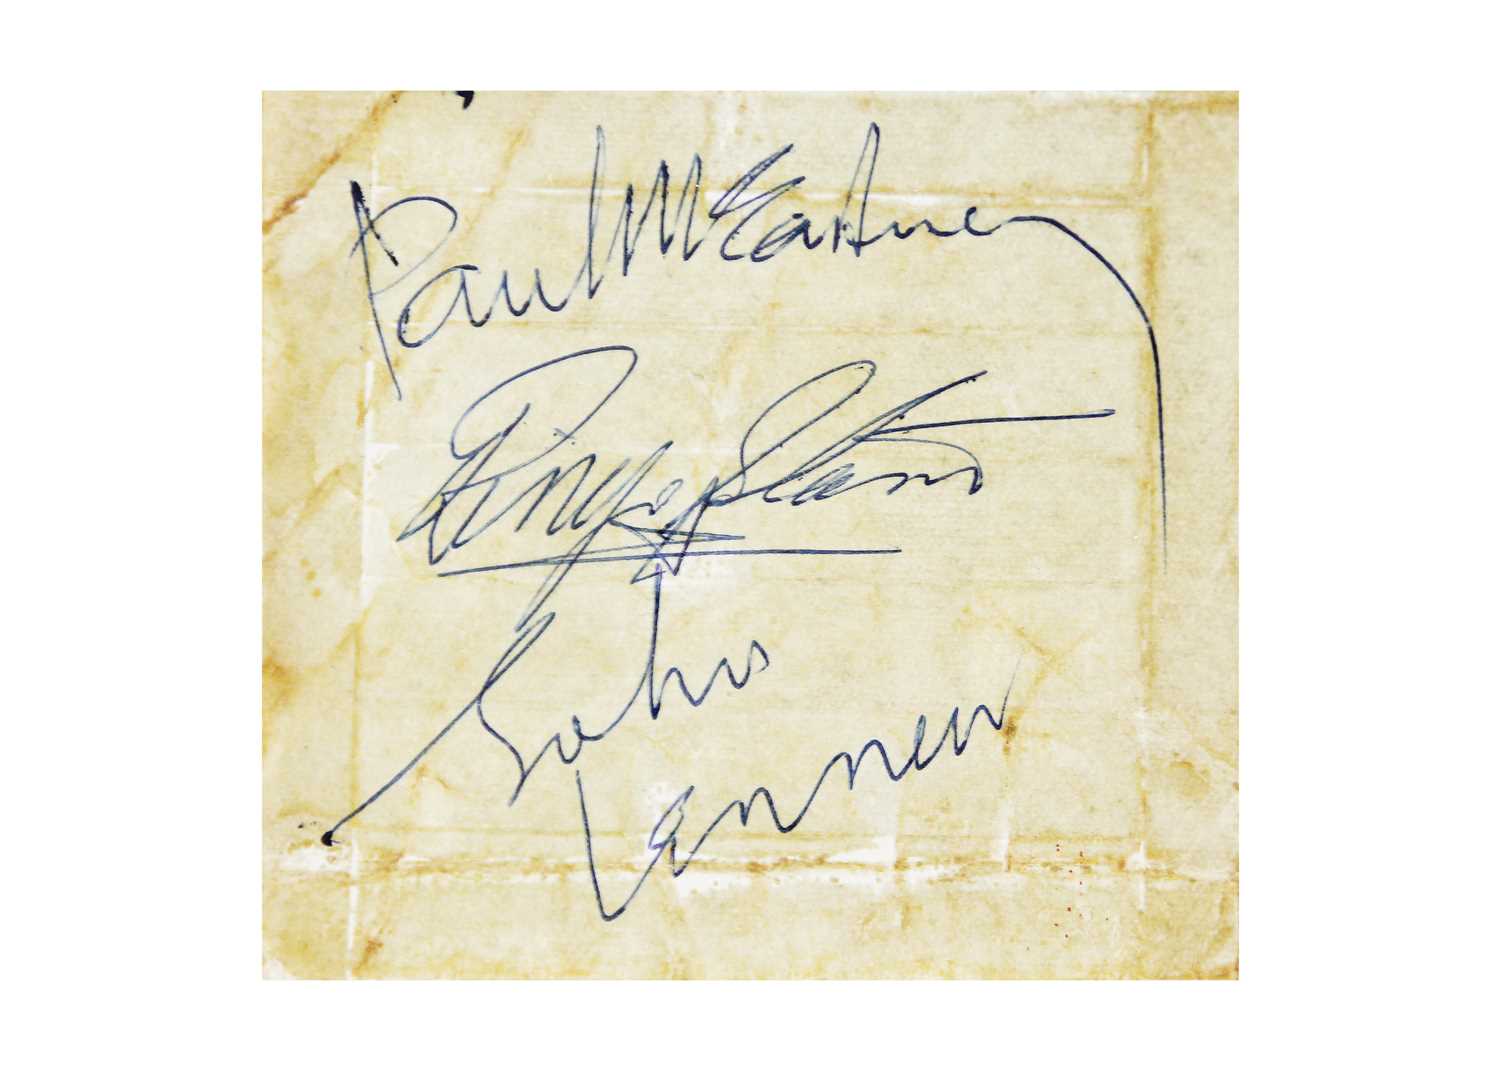 Lot 70 - Signed; The Beatles.